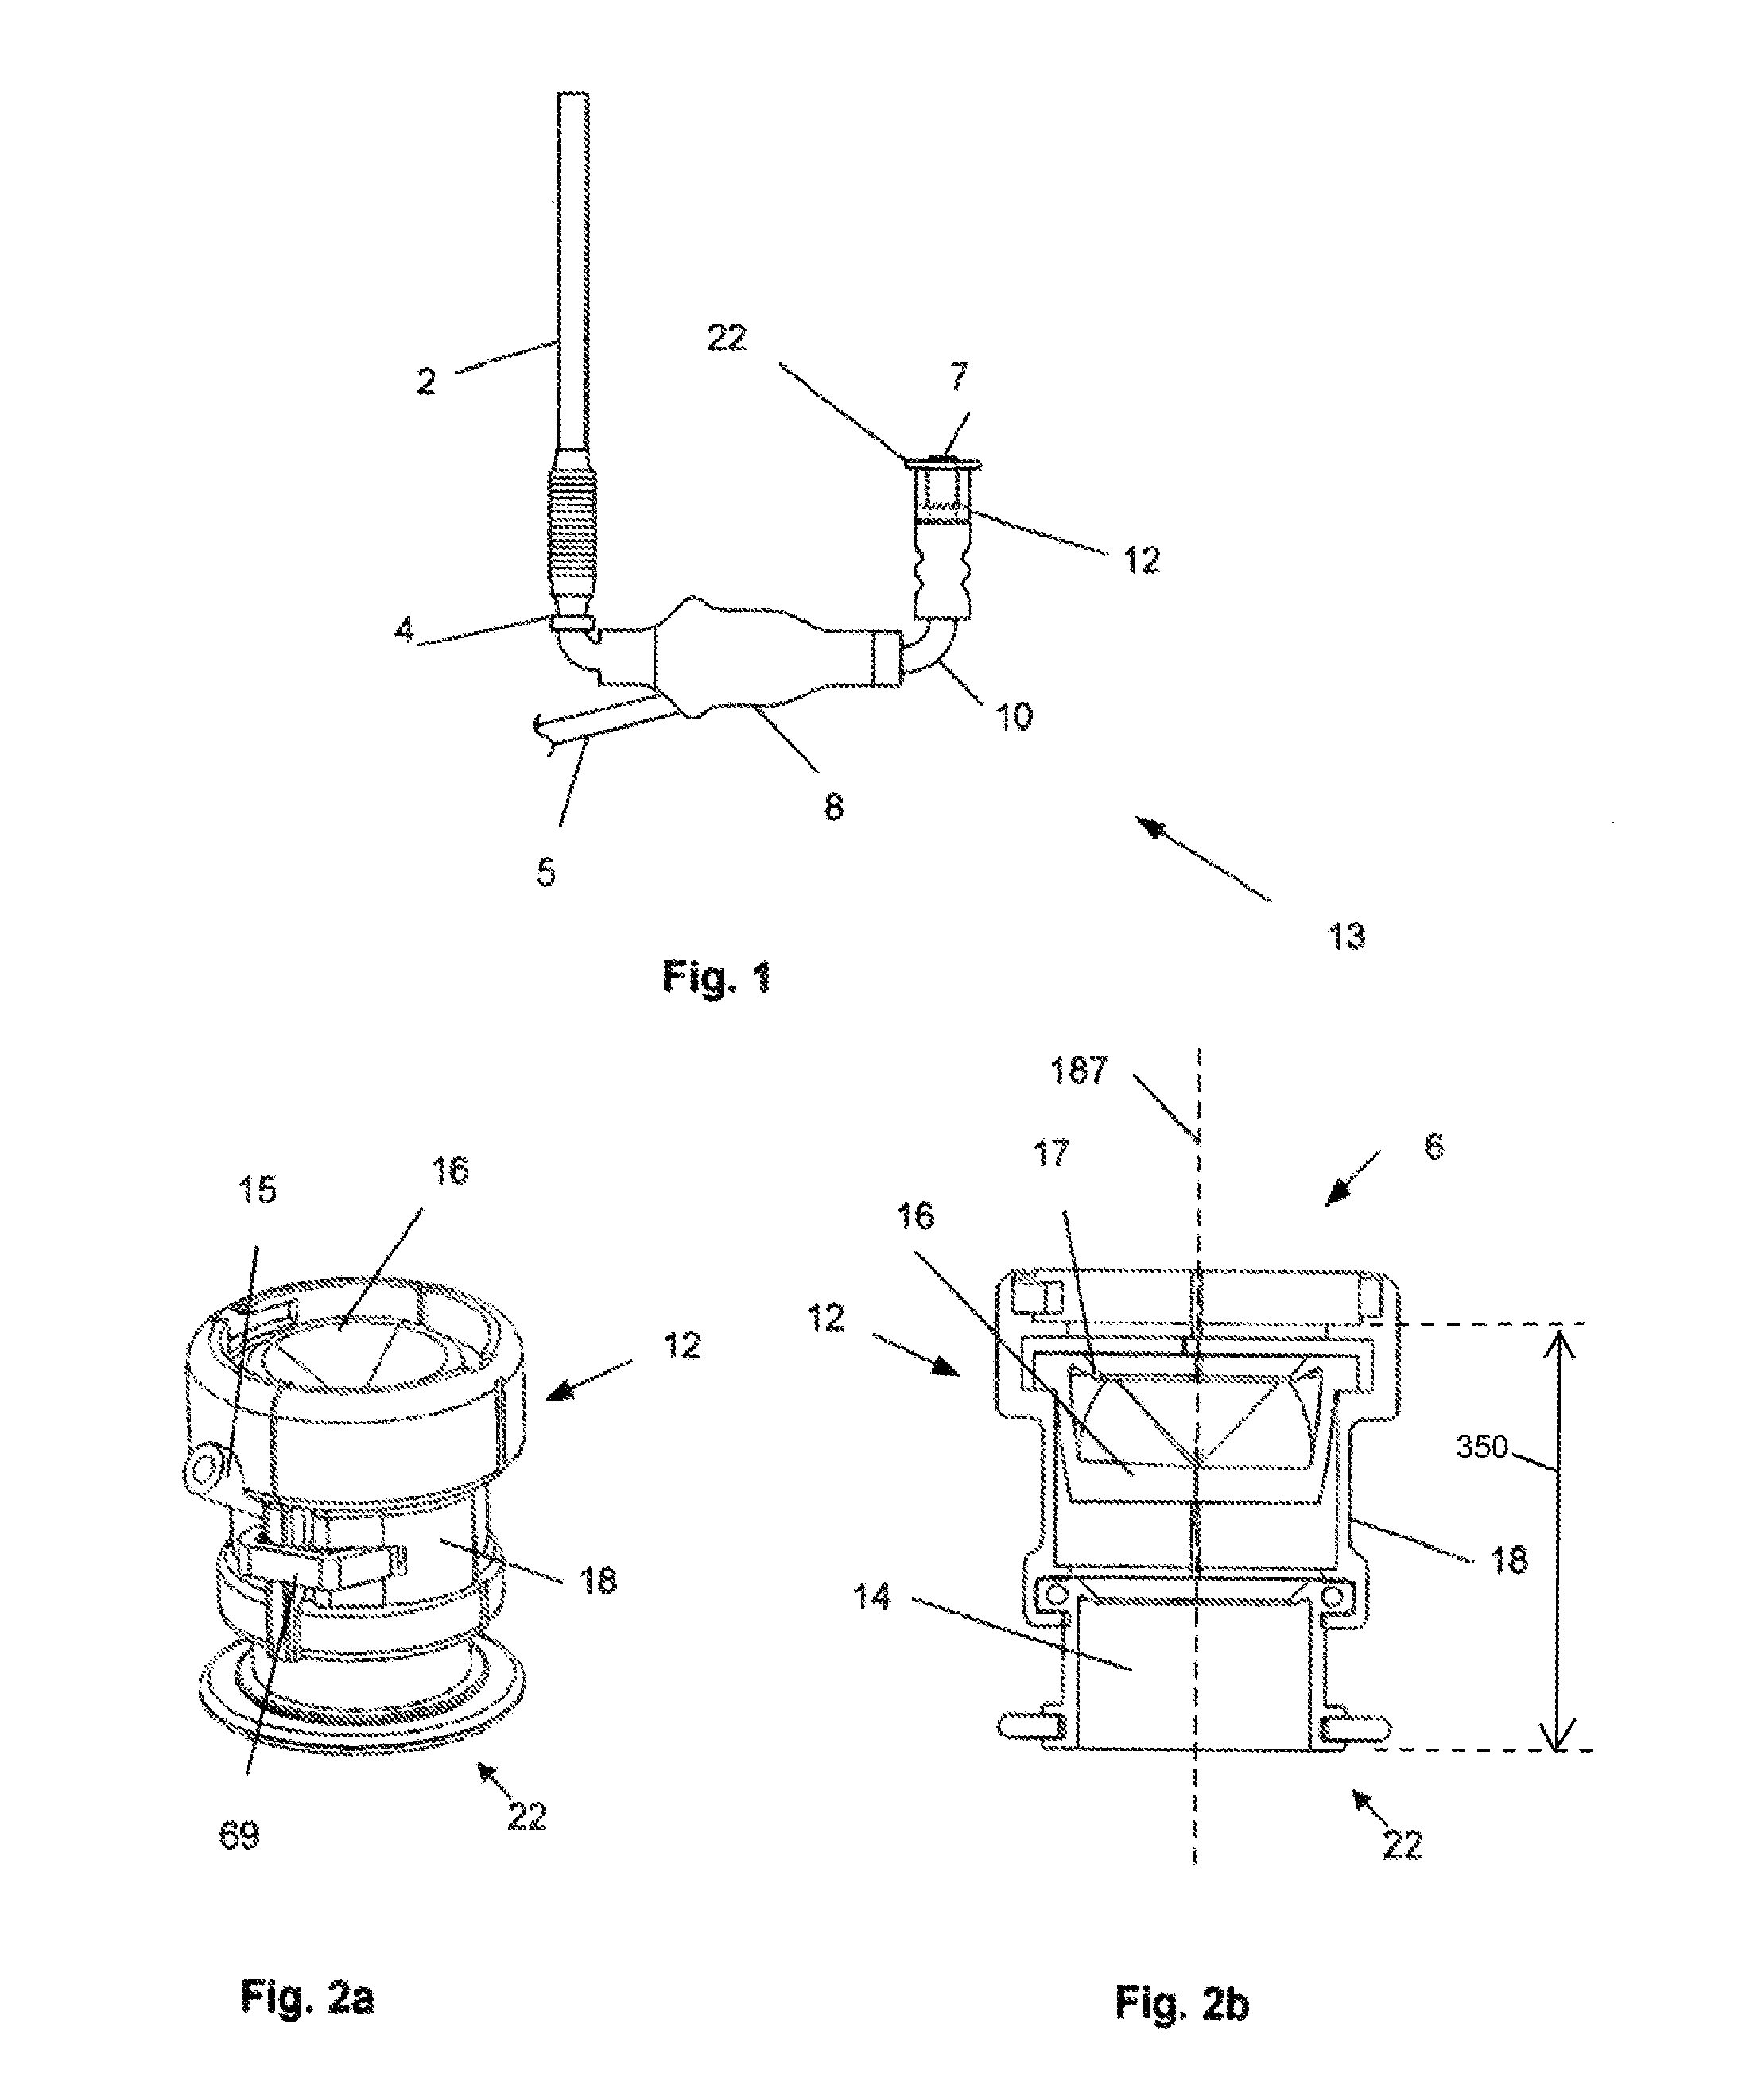 Attachment System, Device and Method